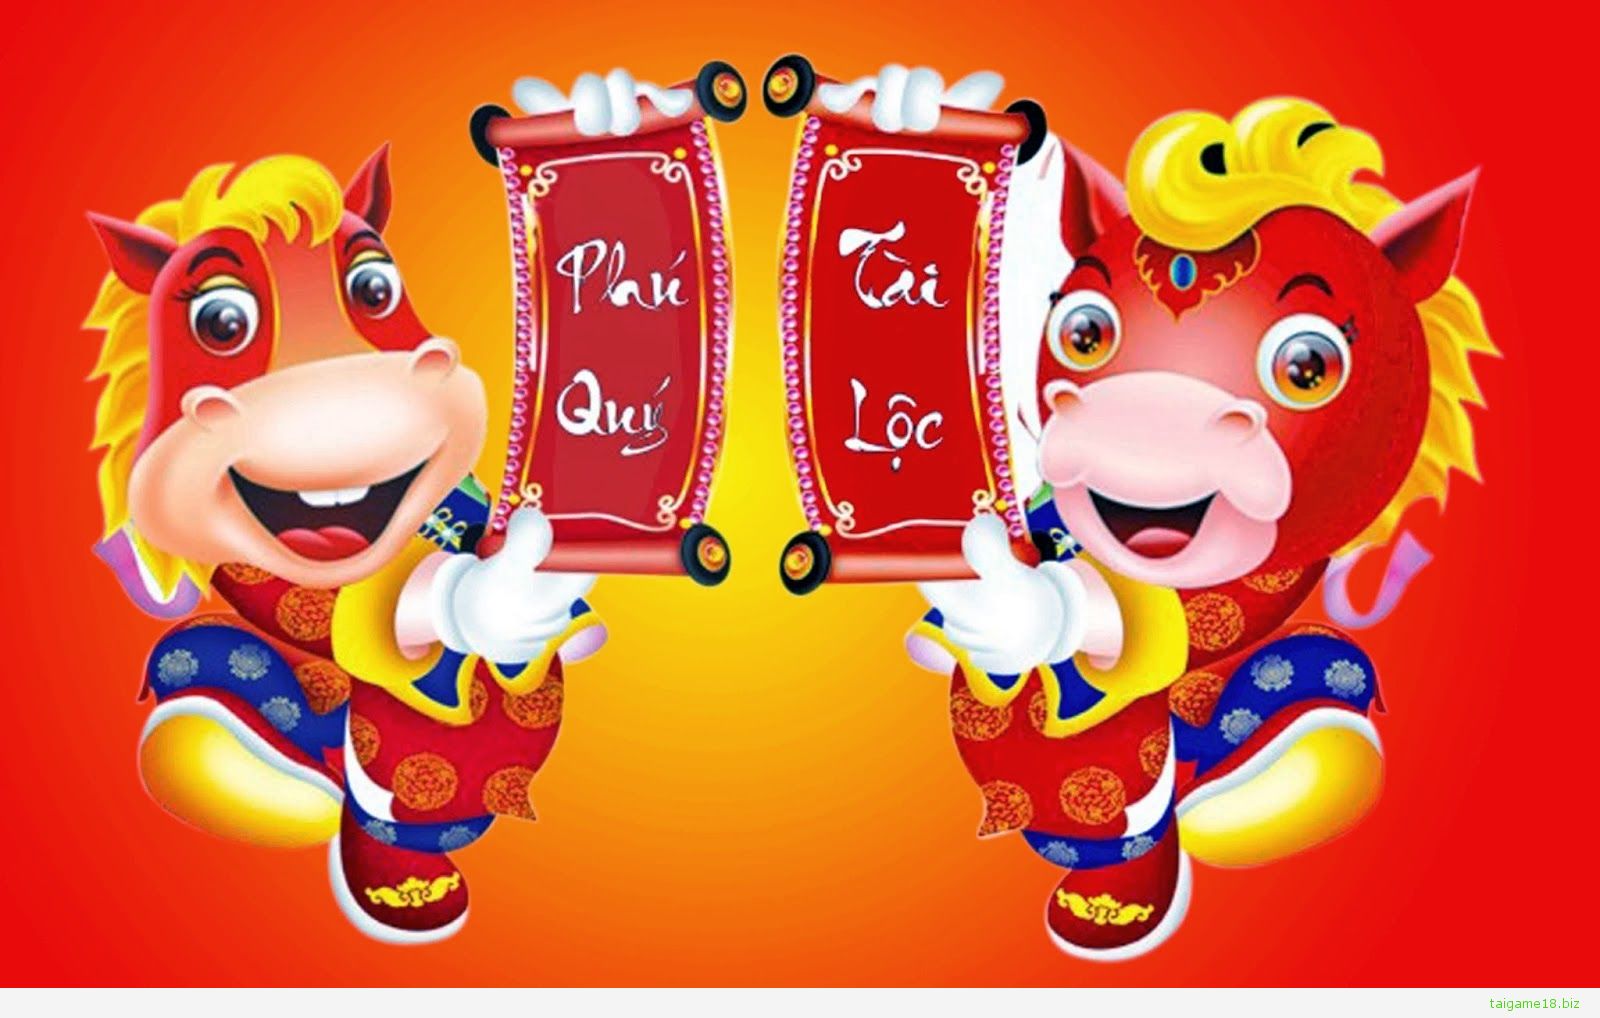 The new year is almost here, and it\'s time to send out some warm wishes to your loved ones. There\'s no better way to do that than with a heartfelt Tết letter wishing them luck, prosperity and happiness for the coming year. Look no further and feast your eyes on these beautiful and inspirational Tết letters!